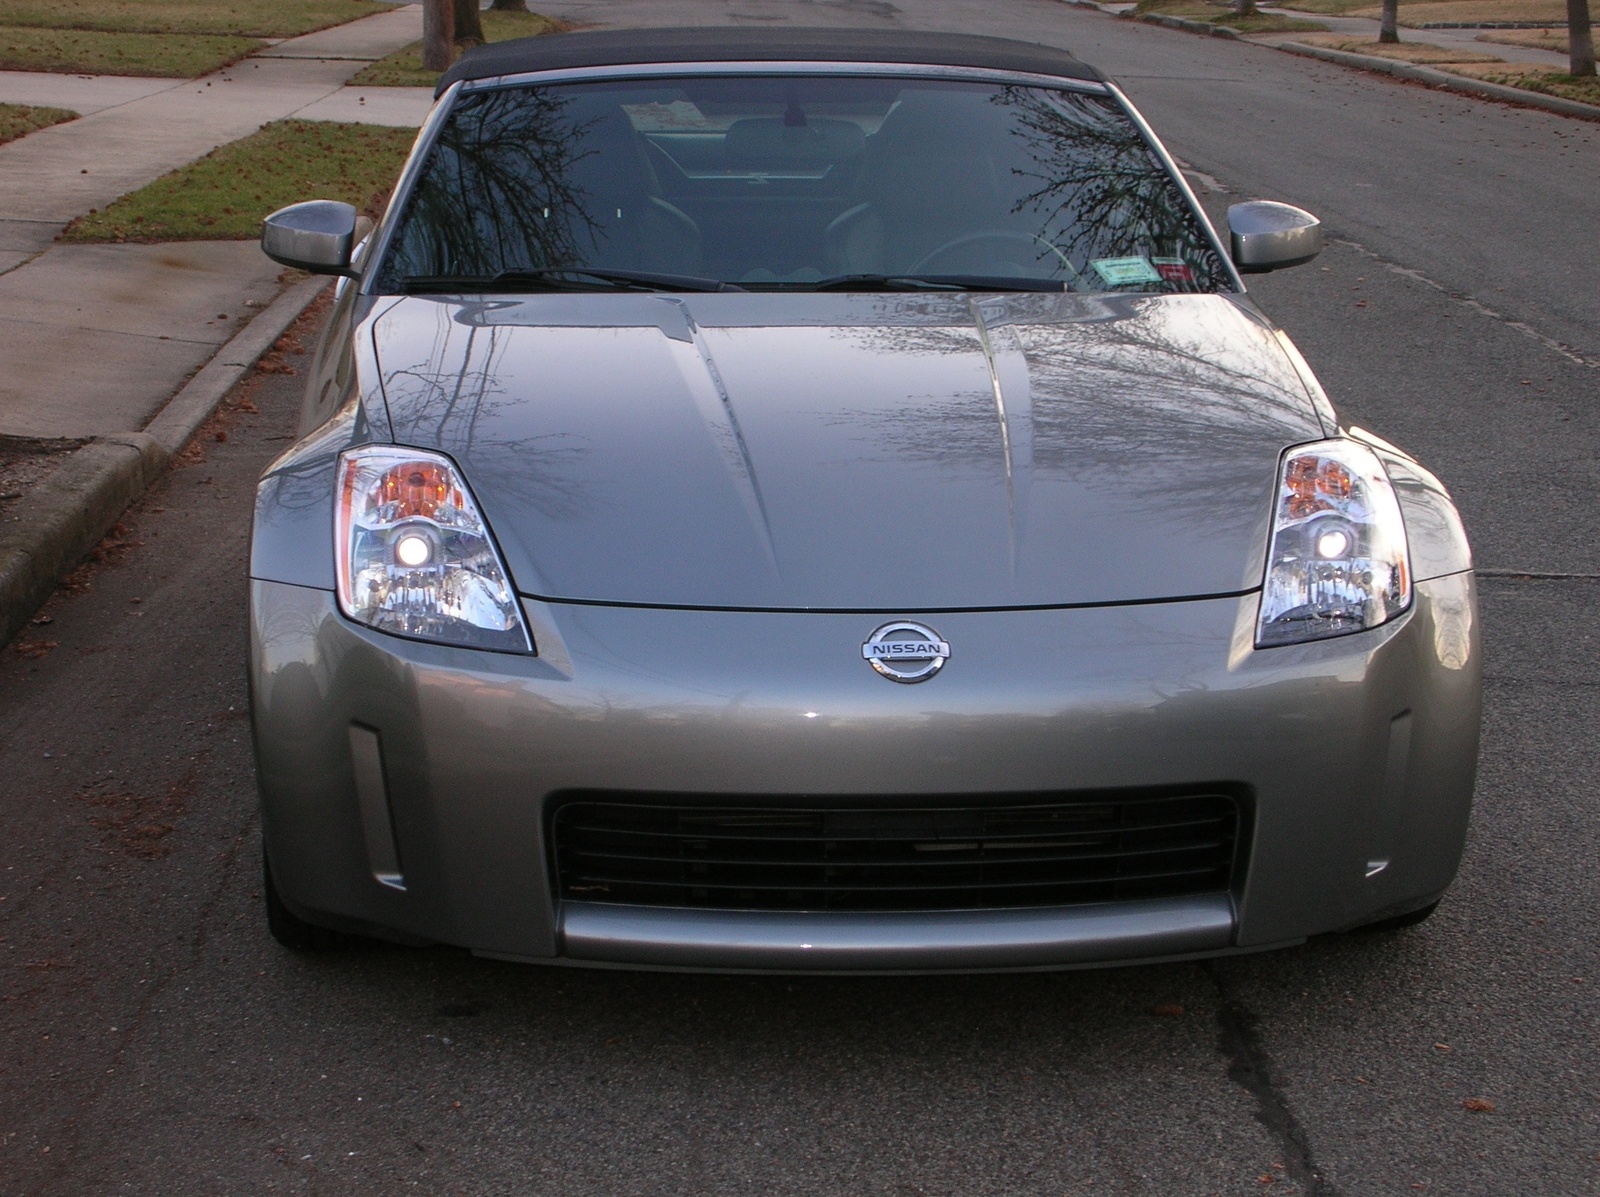 2005 Nissan 350z touring roadster specs #6